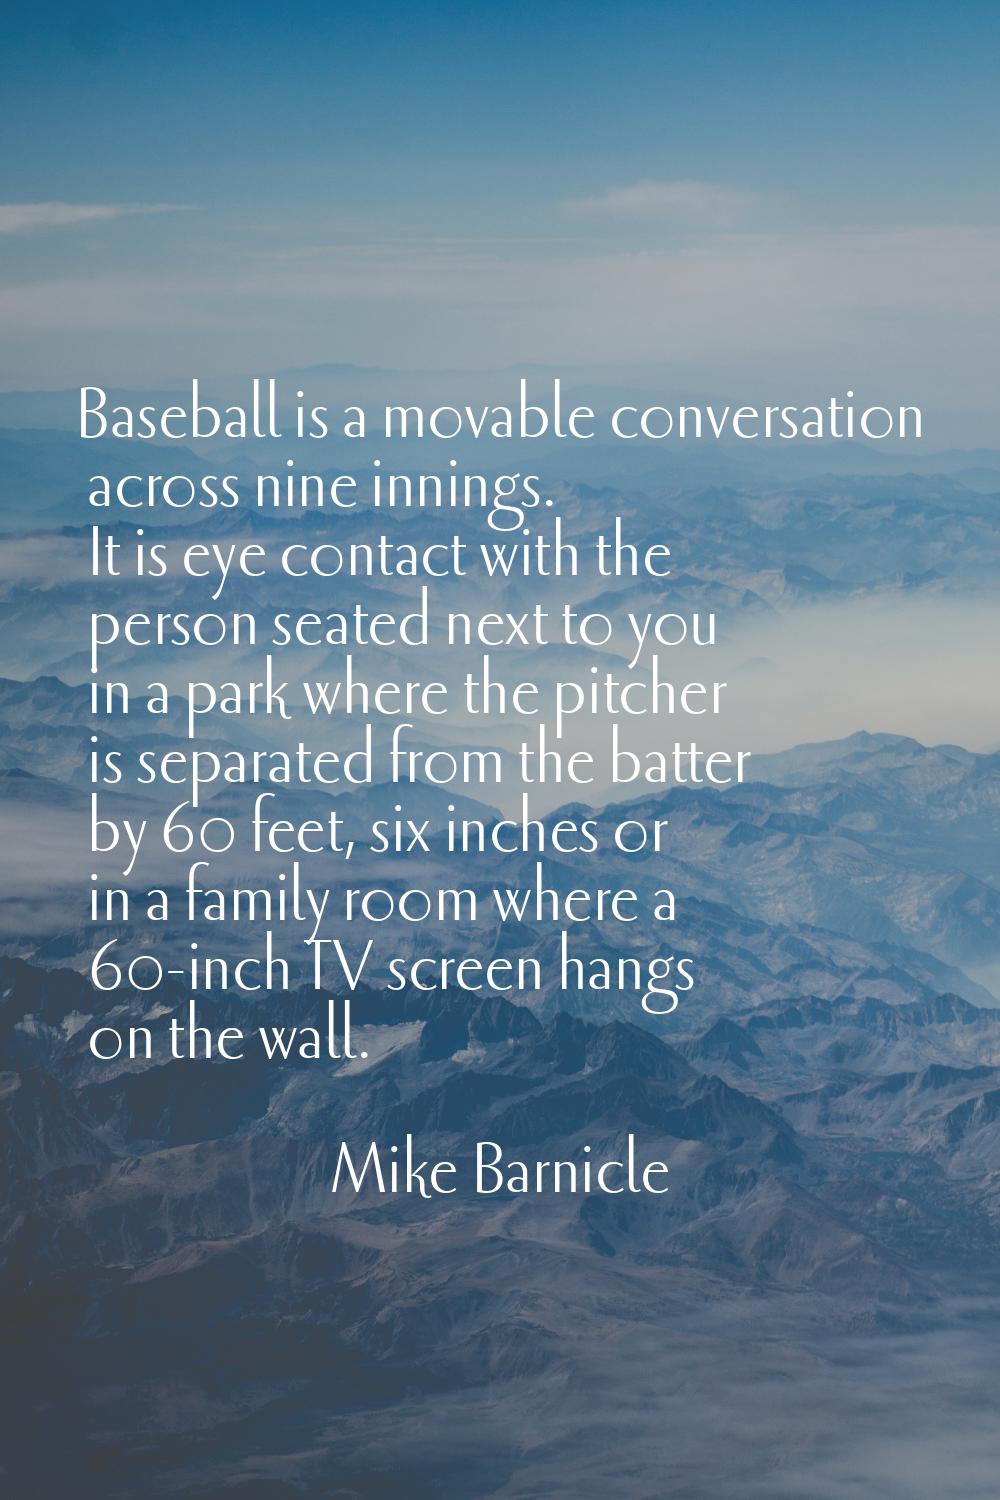 Baseball is a movable conversation across nine innings. It is eye contact with the person seated ne